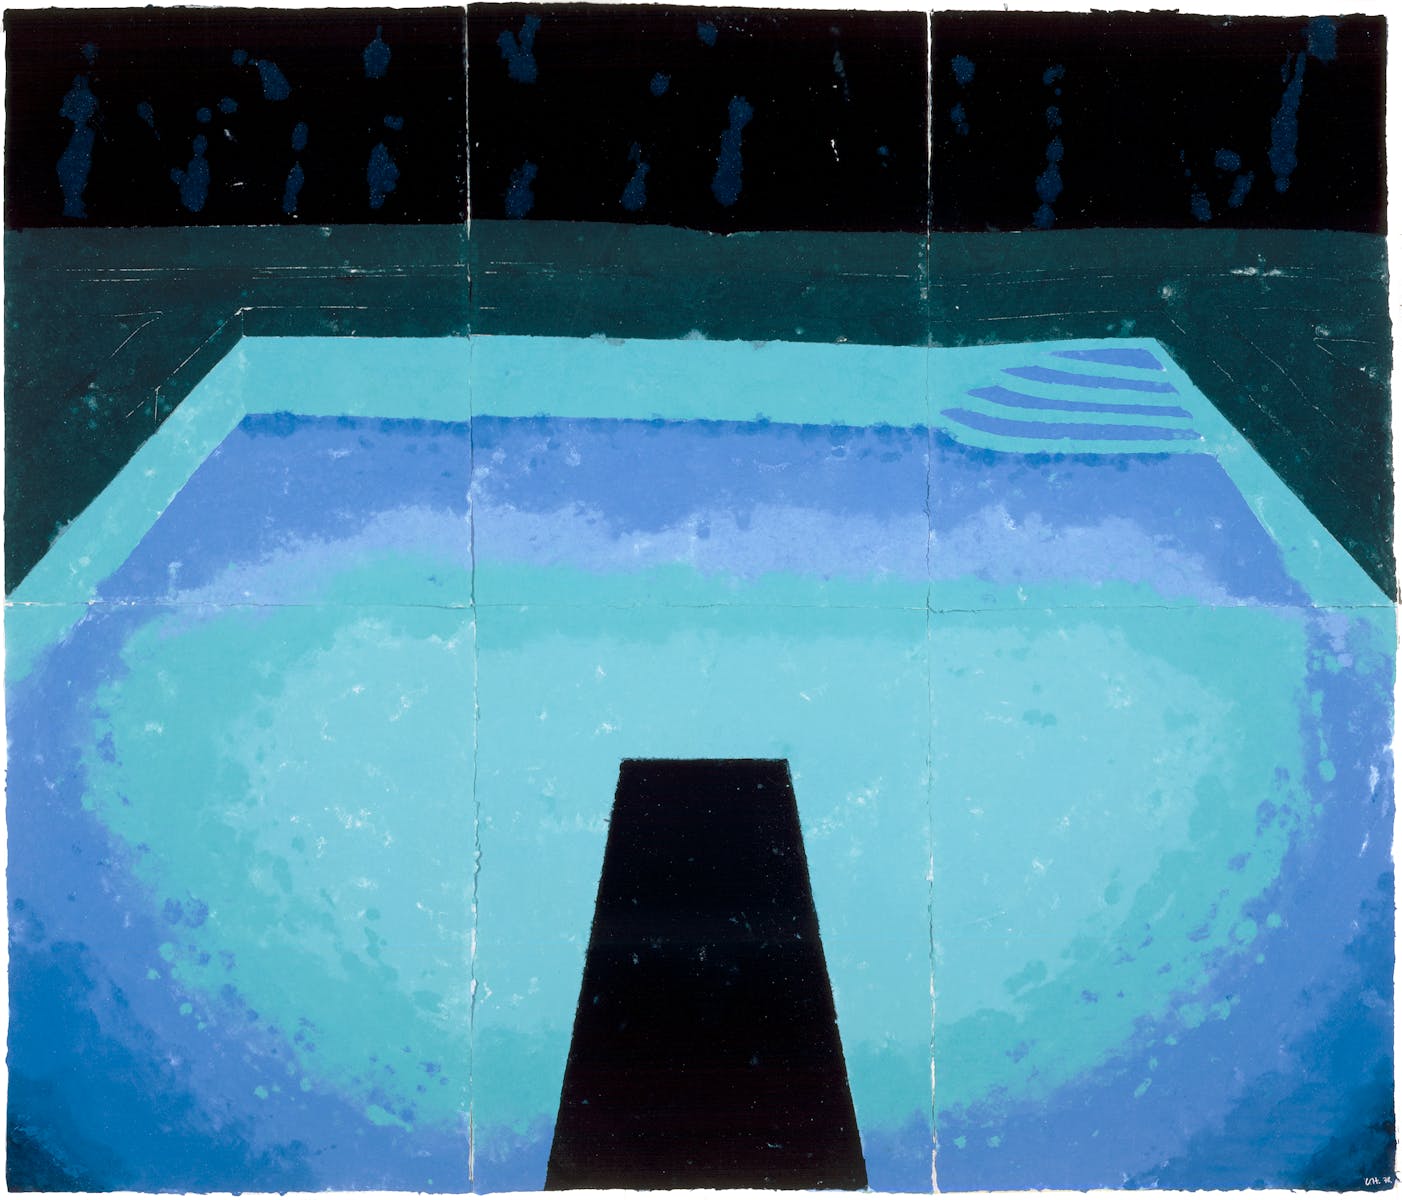 Painting on six sheets of paper of pool and diving board at night